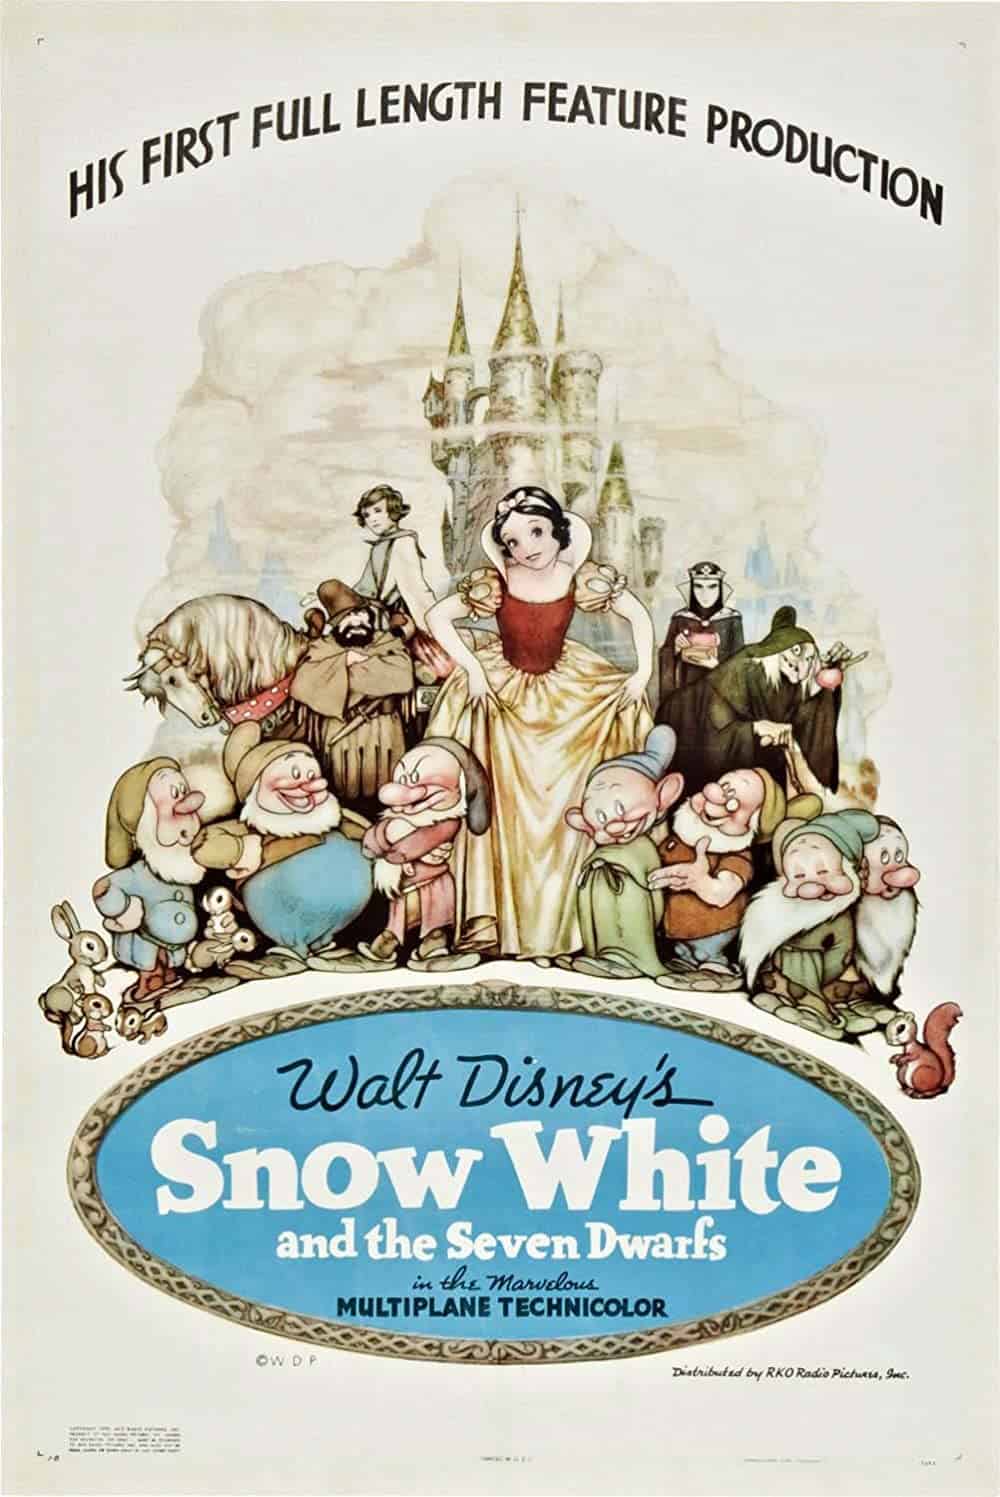 Snow White and the Seven Dwarfs (1937) Best Princess Movies